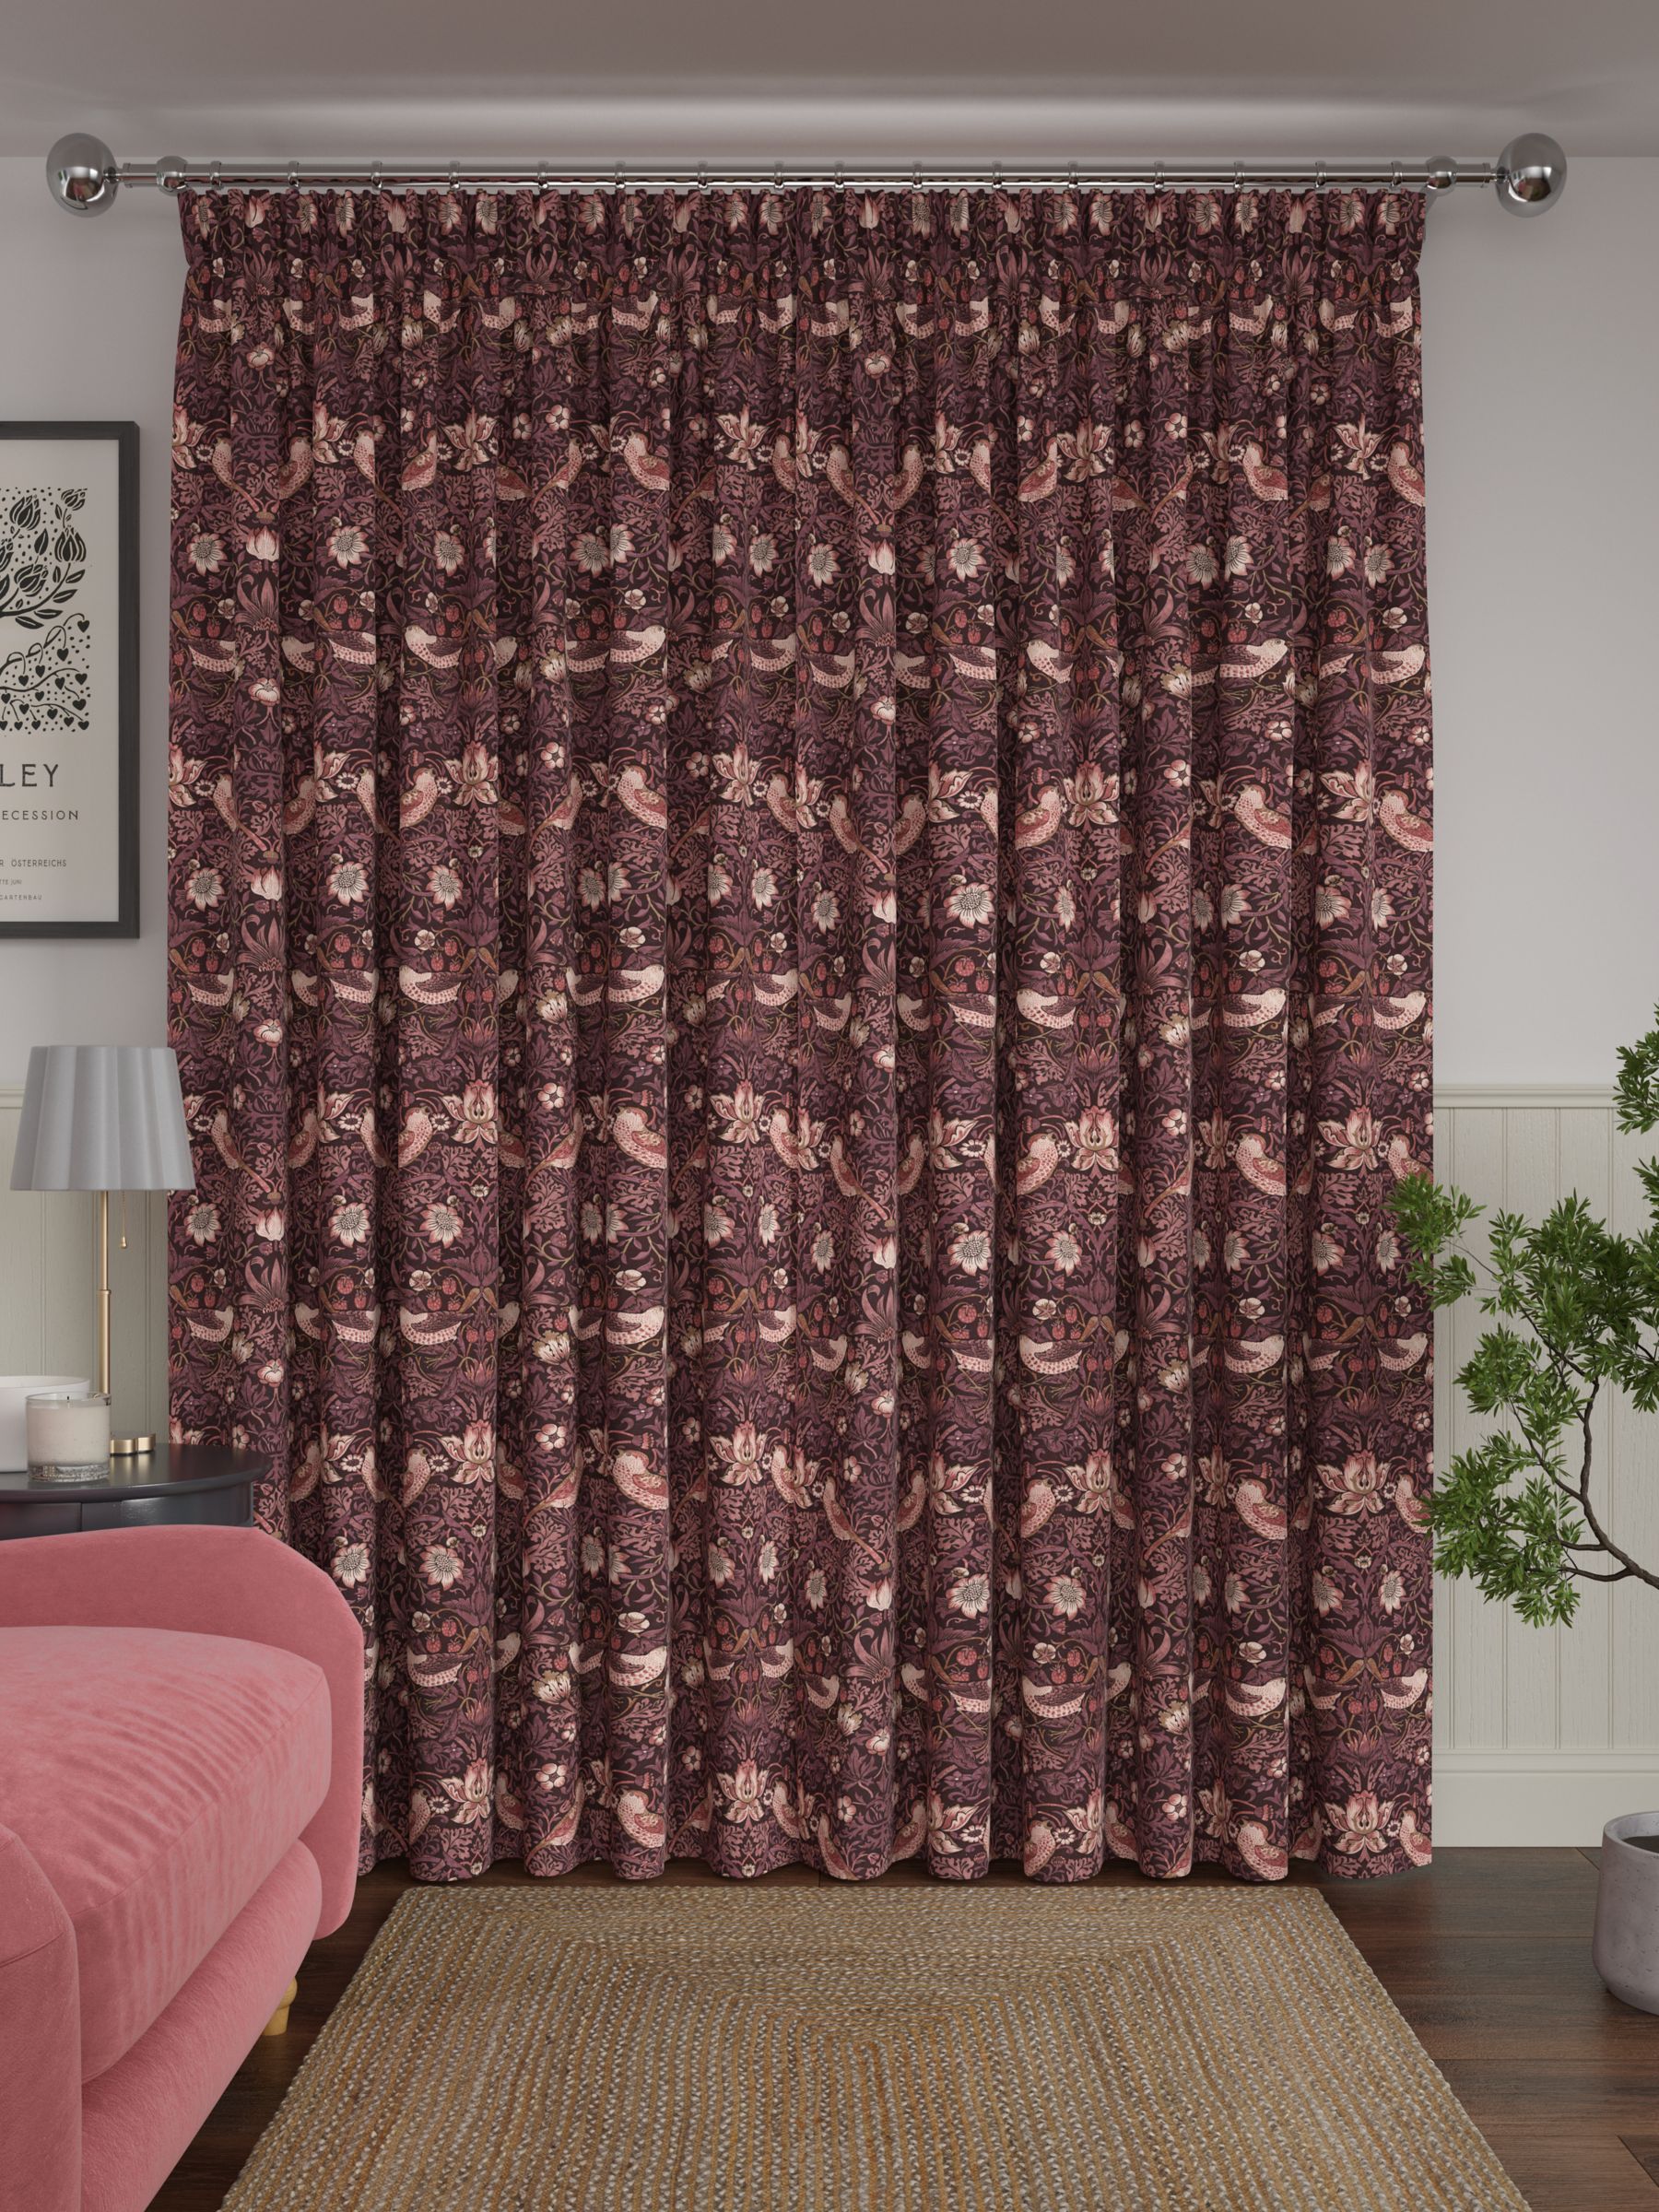 Morris & Co. Strawberry Thief Pair Lined Pencil Pleat Curtains, Damson ...